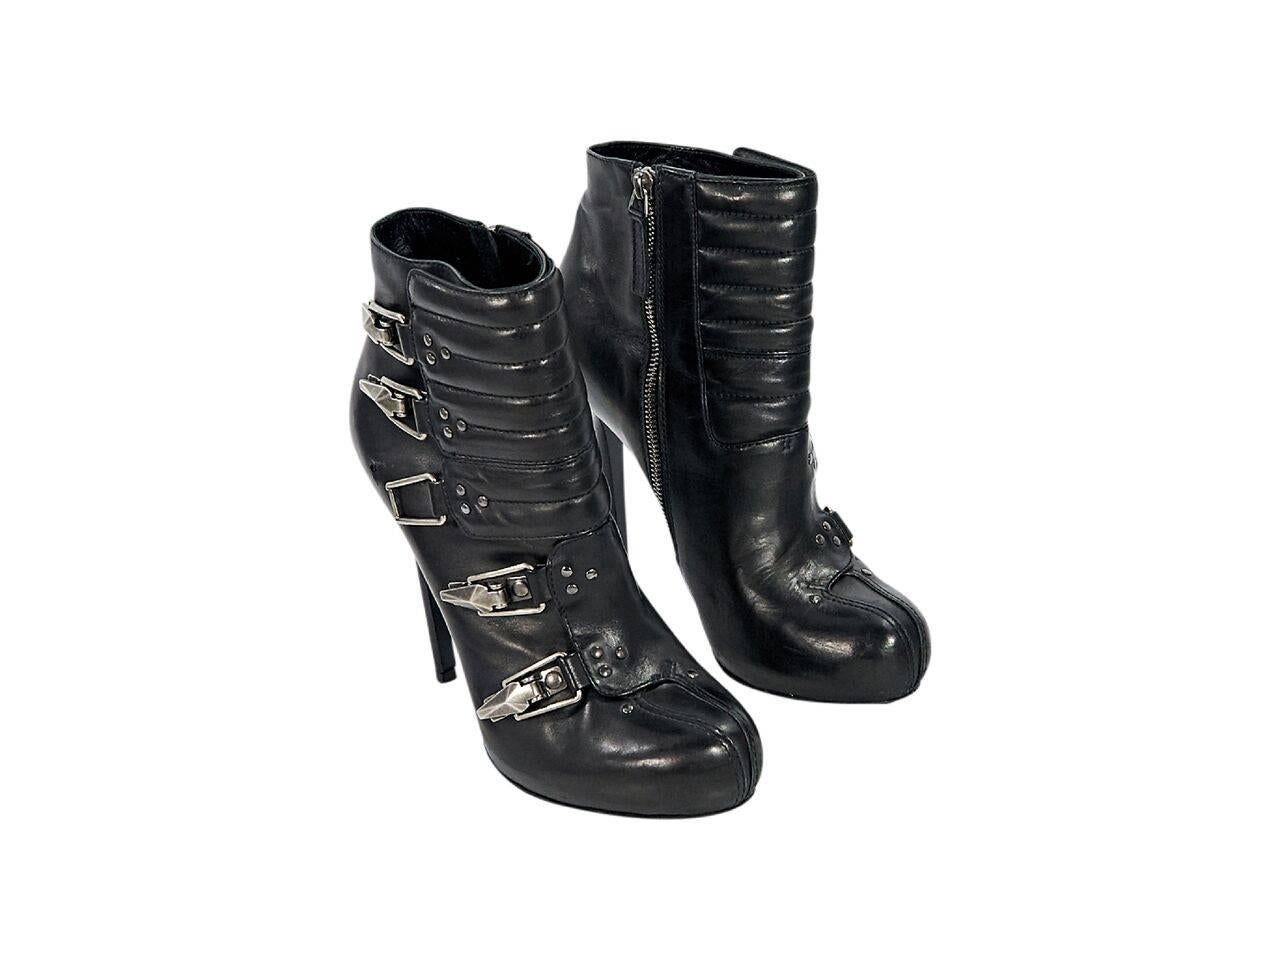 Product details:  Black leather ankle boots by Alexander McQueen.  Multiple buckle strap details.  Inner zip closure.  Concealed platform.  Silvertone hardware.
Condition: Pre-owned. Very good.
Est. Retail $ 1,198.00